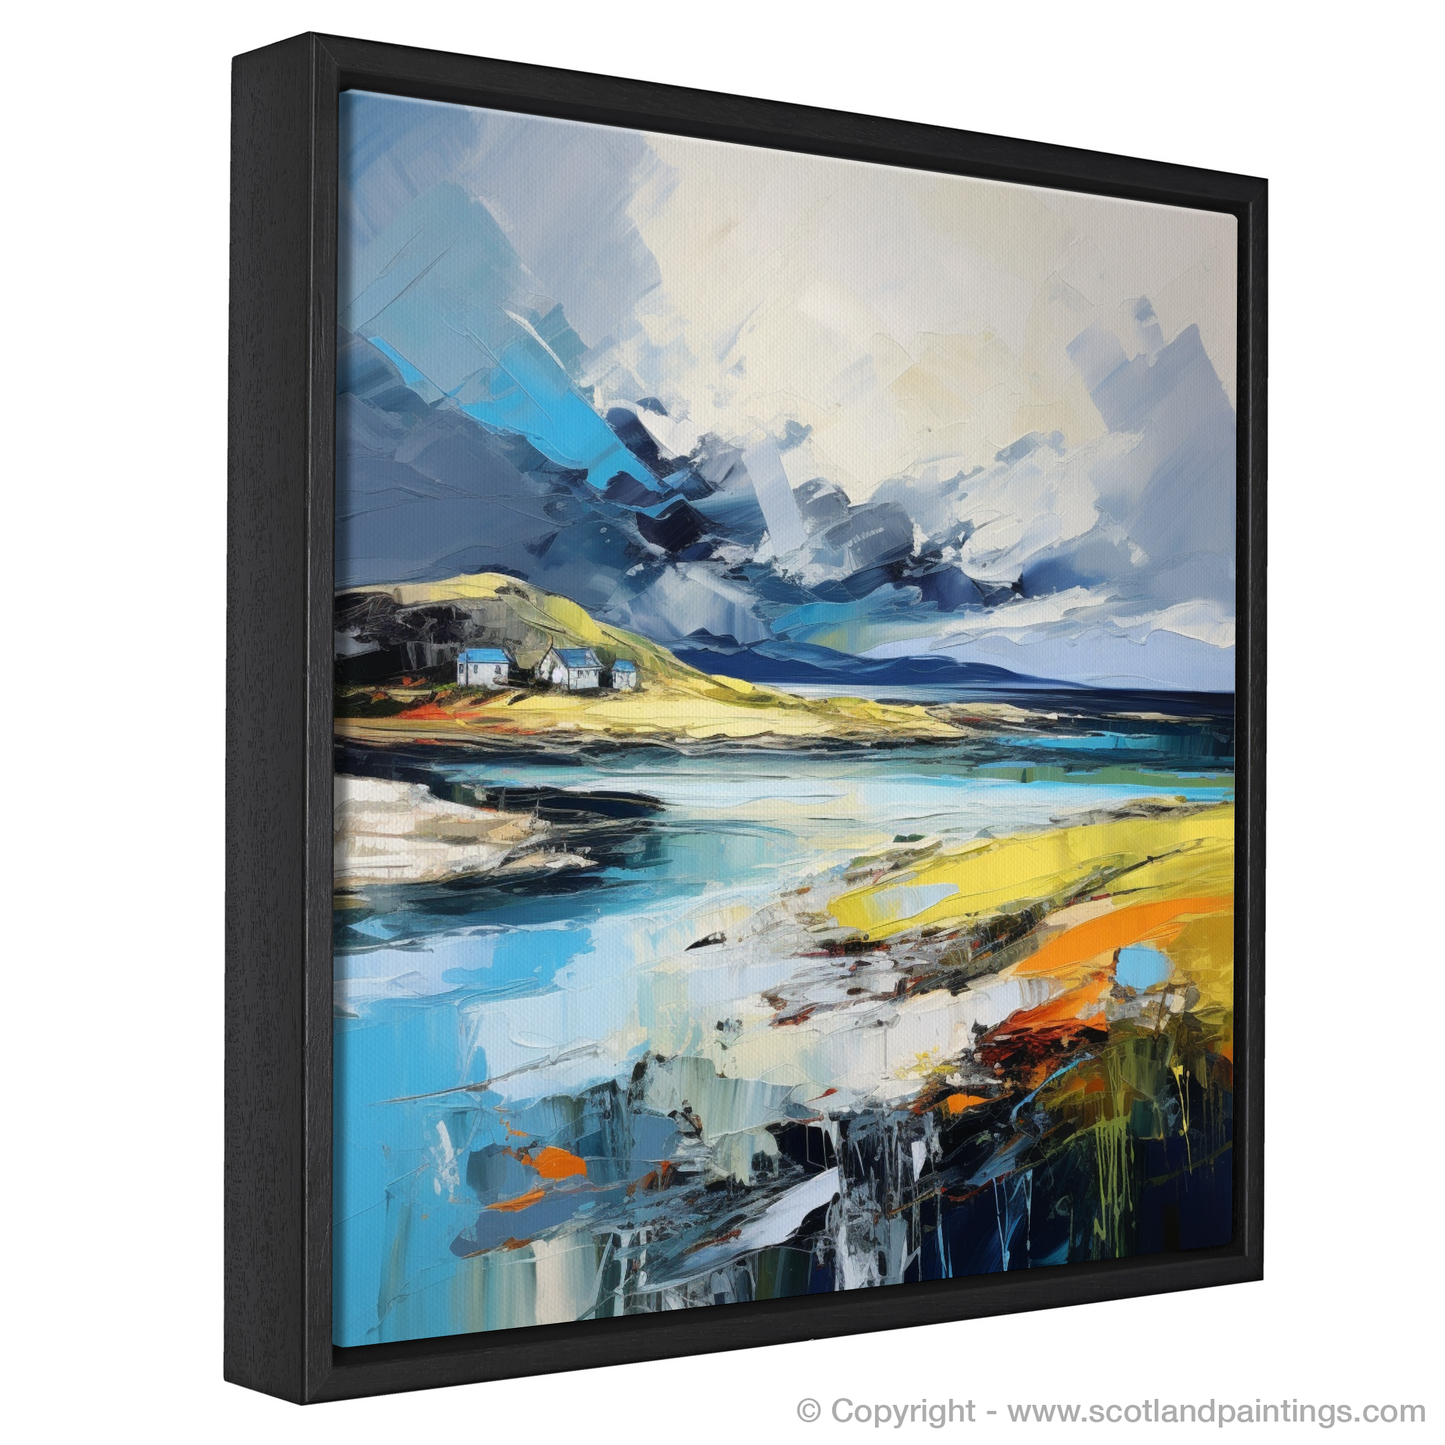 Painting and Art Print of Achmelvich Bay with a stormy sky entitled "Storm's Embrace over Achmelvich Bay".